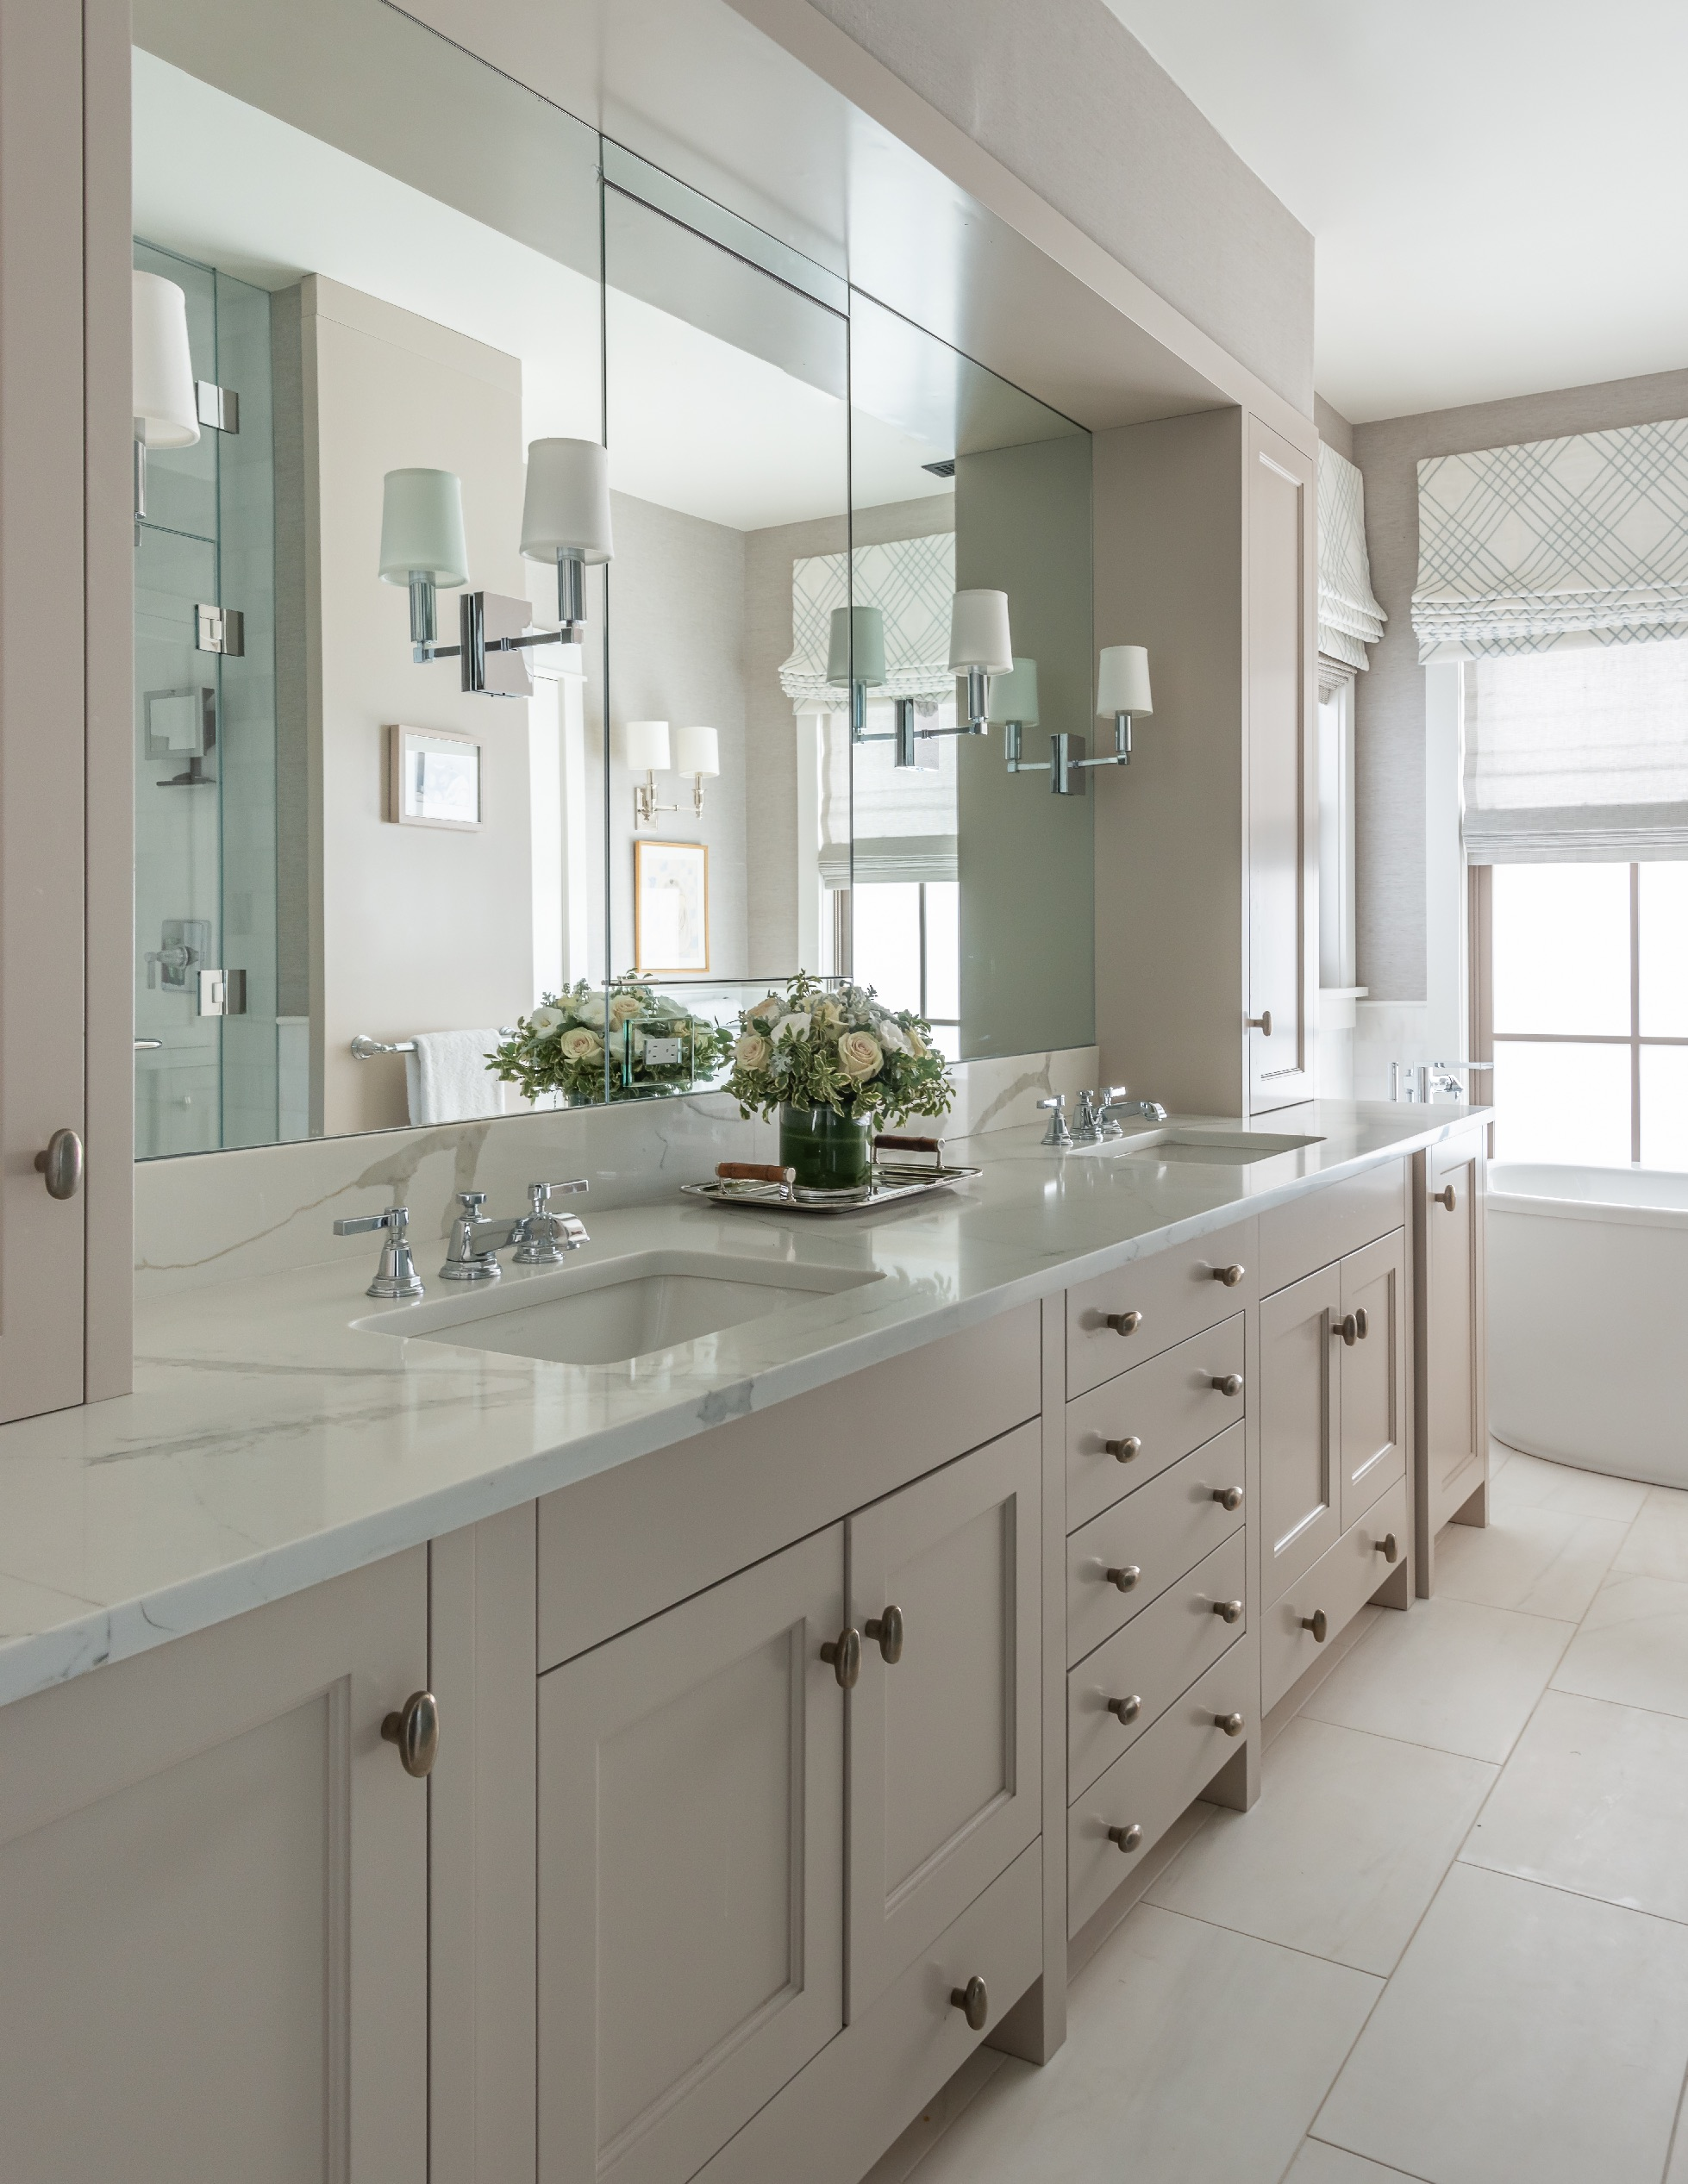  Contemporary Modern Vacation Home Bathroom. Snedens Landing Residence by Alan Tanksley, Inc..